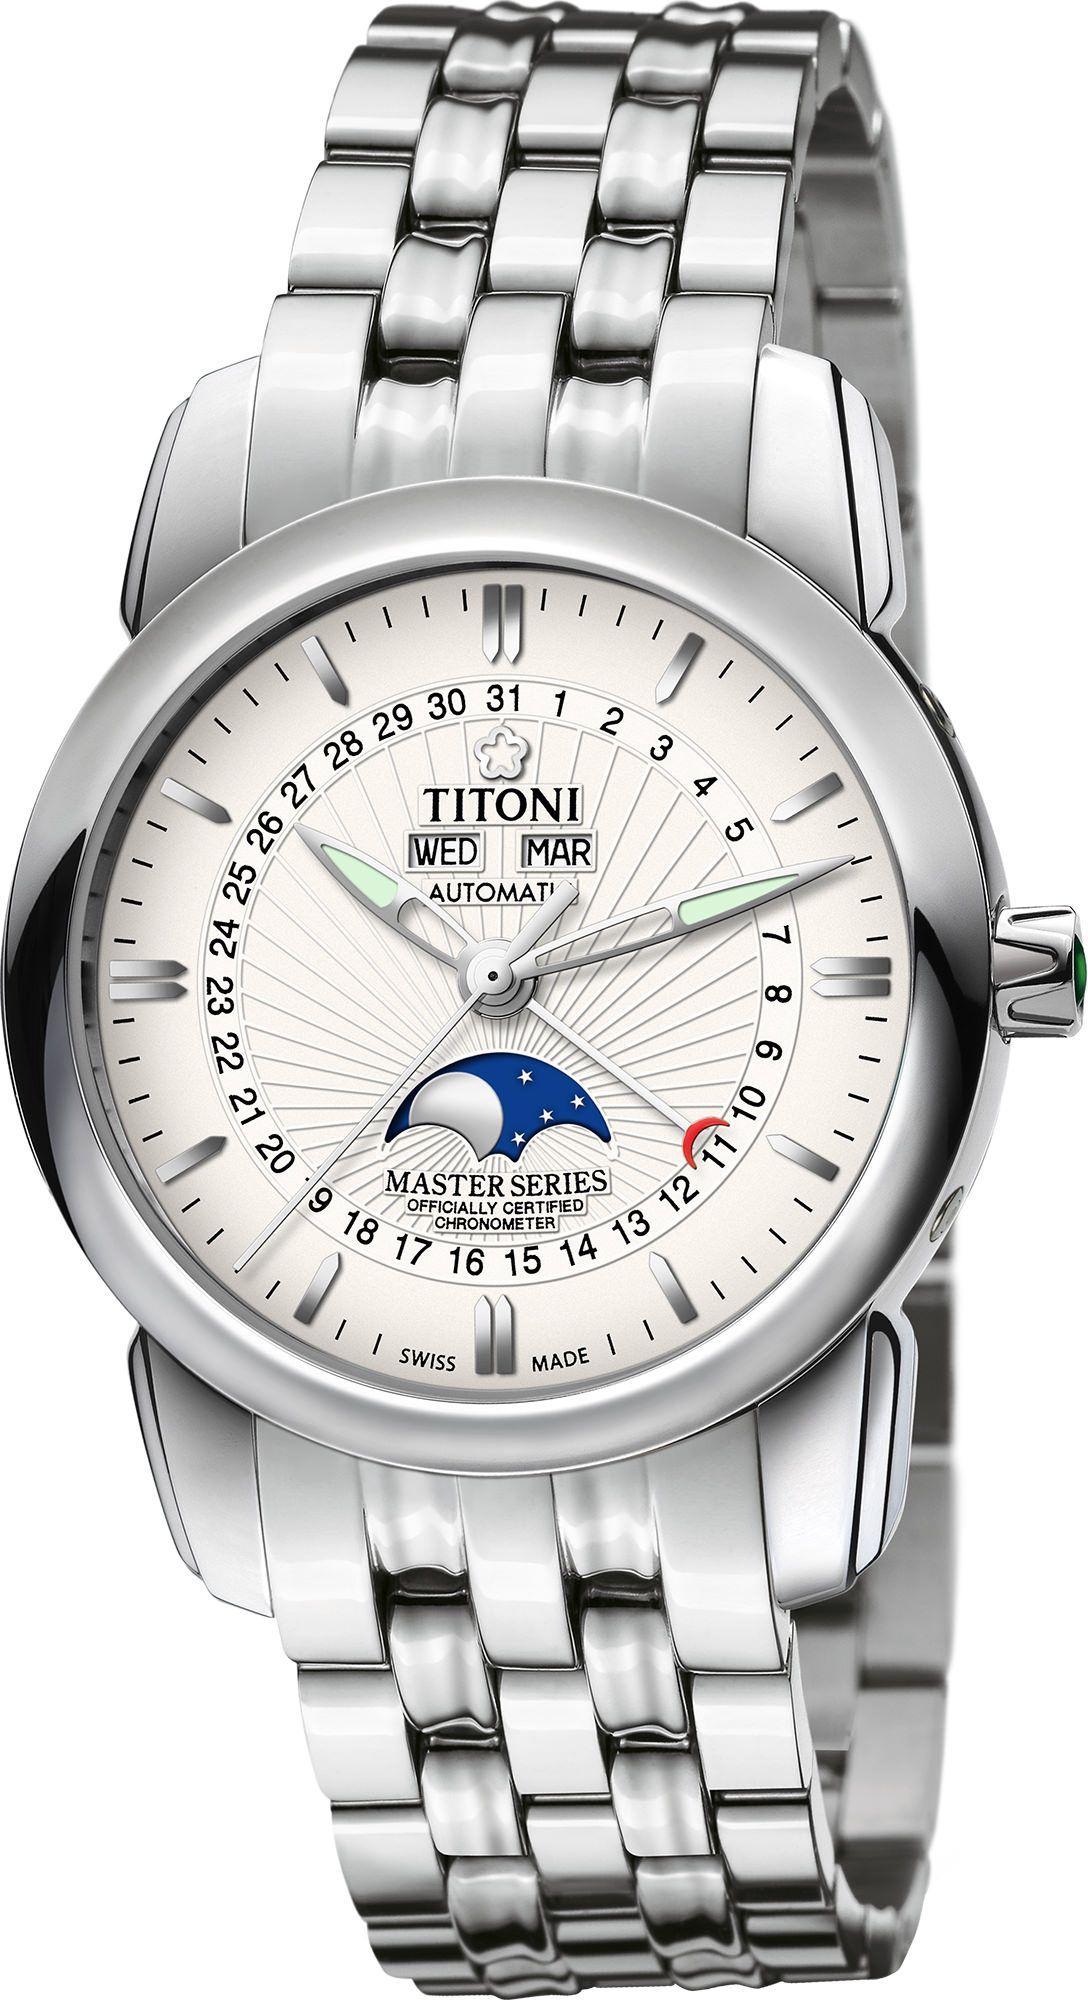 Titoni Master Series  White Dial 40 mm Automatic Watch For Men - 1